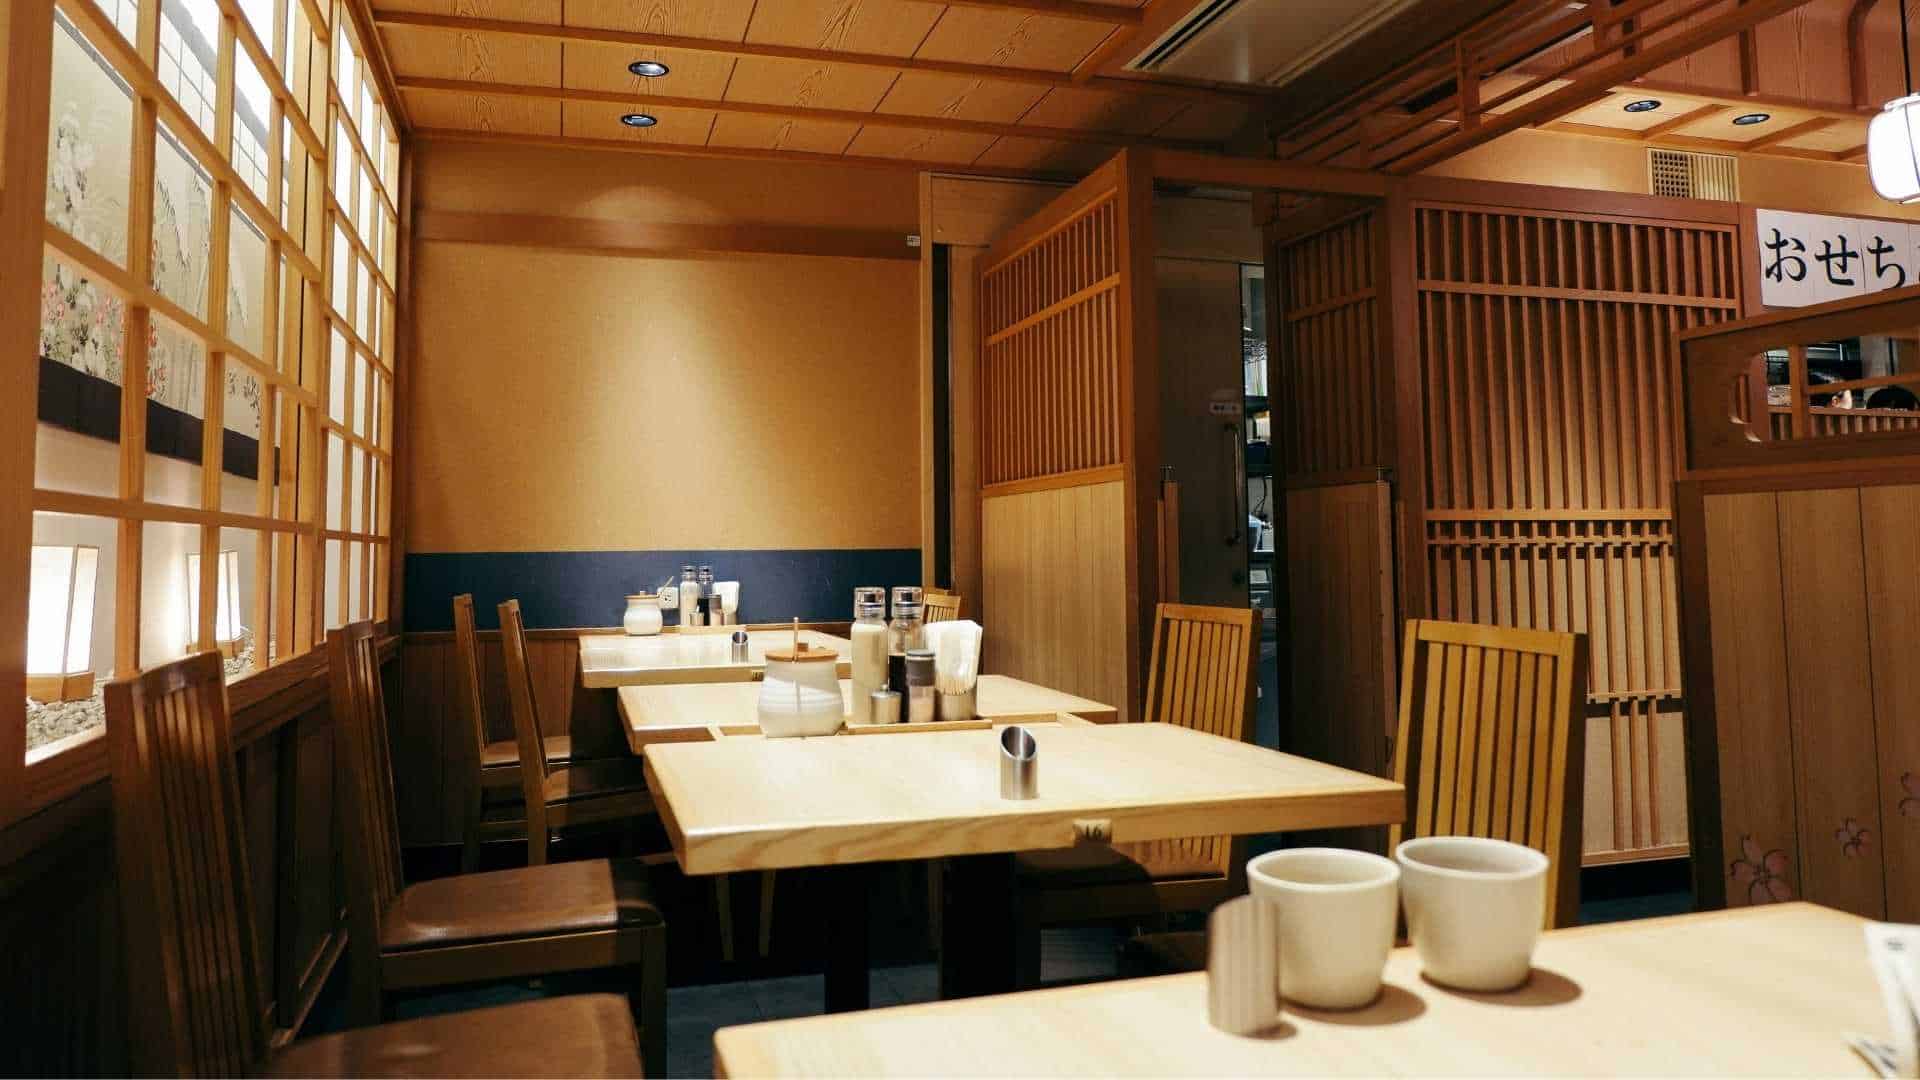 Where to eat in Japan popular japanese chain restaurants you should try